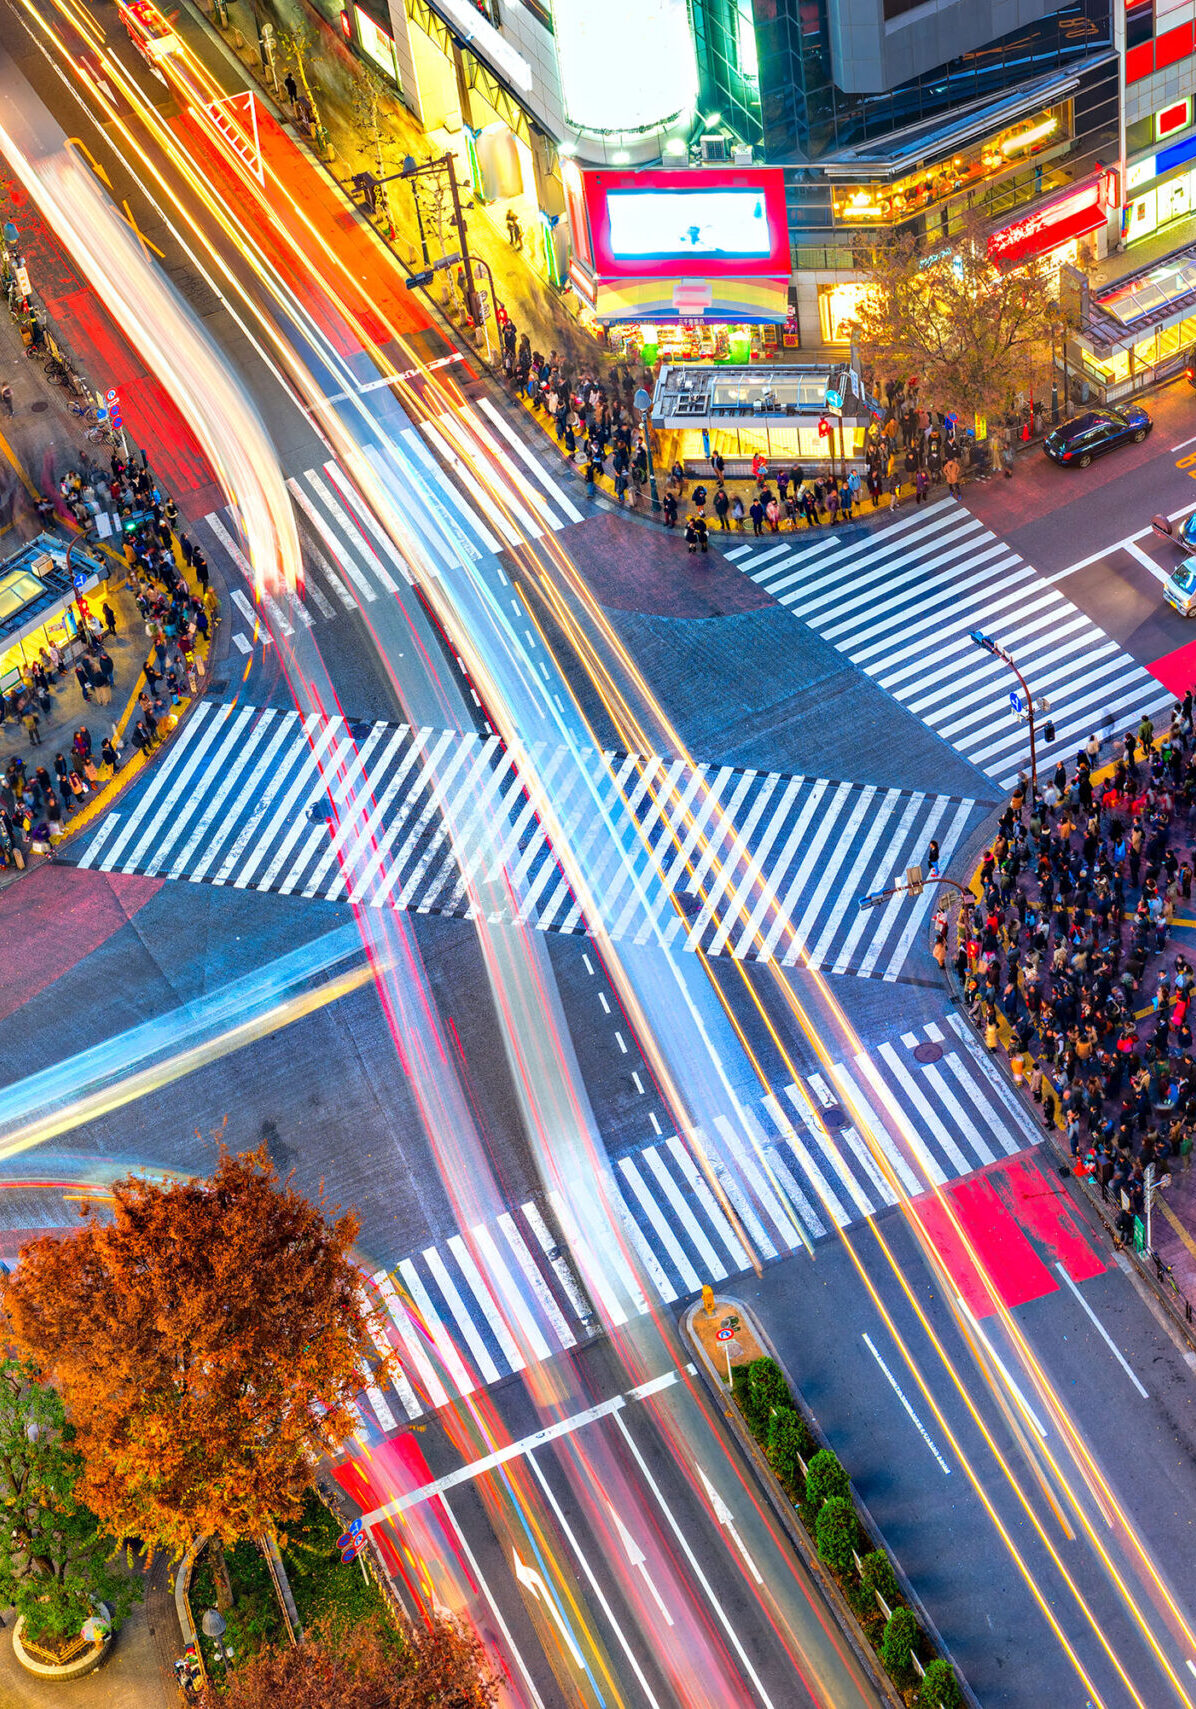 Aerial view of Shibuya Crossing, Tokyo. The scramble crosswalk is one of the largest in the world. Long exposition with light trail